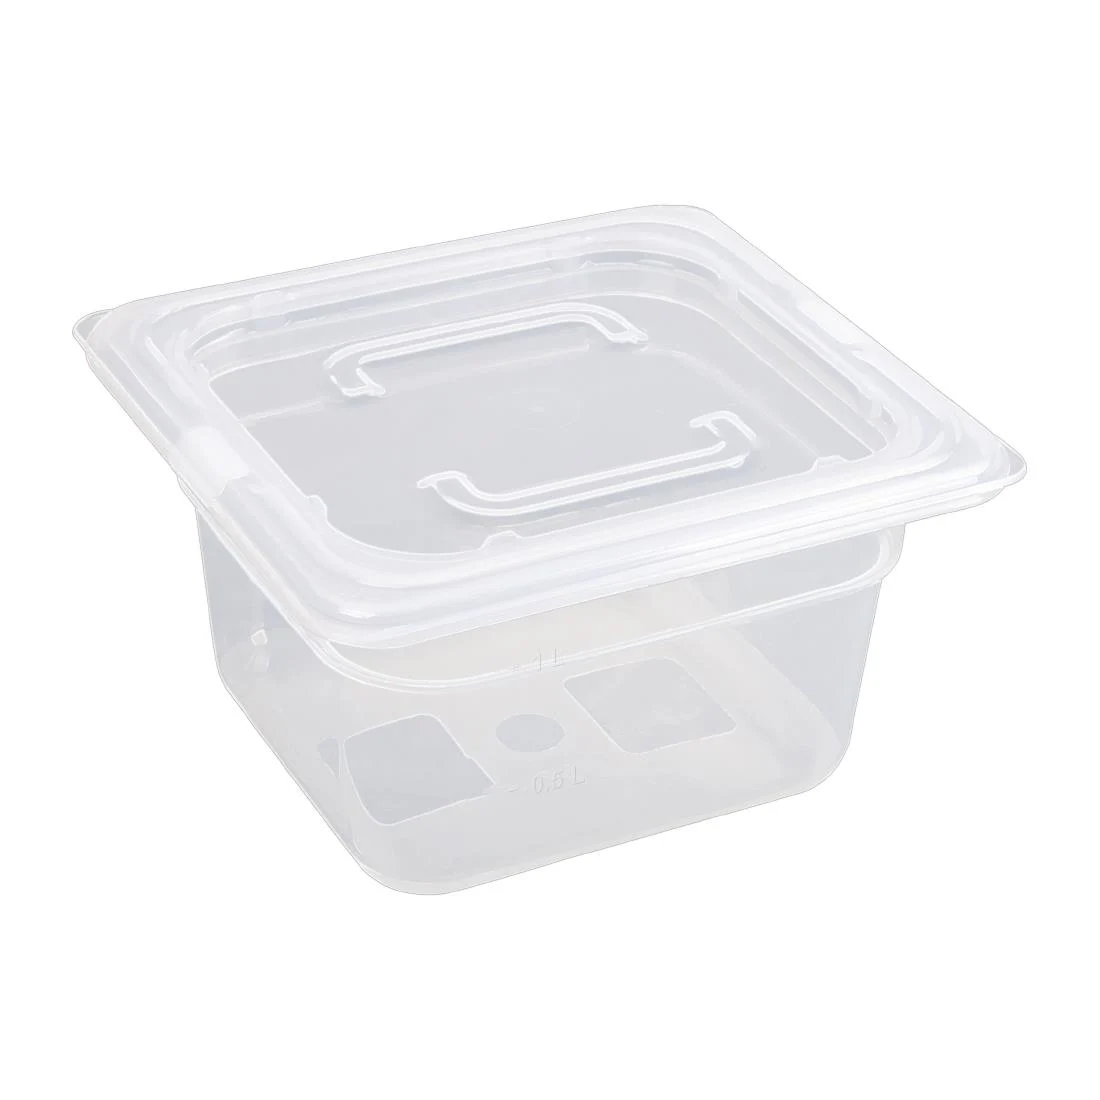 Polypropylene 1/6 Gastronorm Containers with Lids